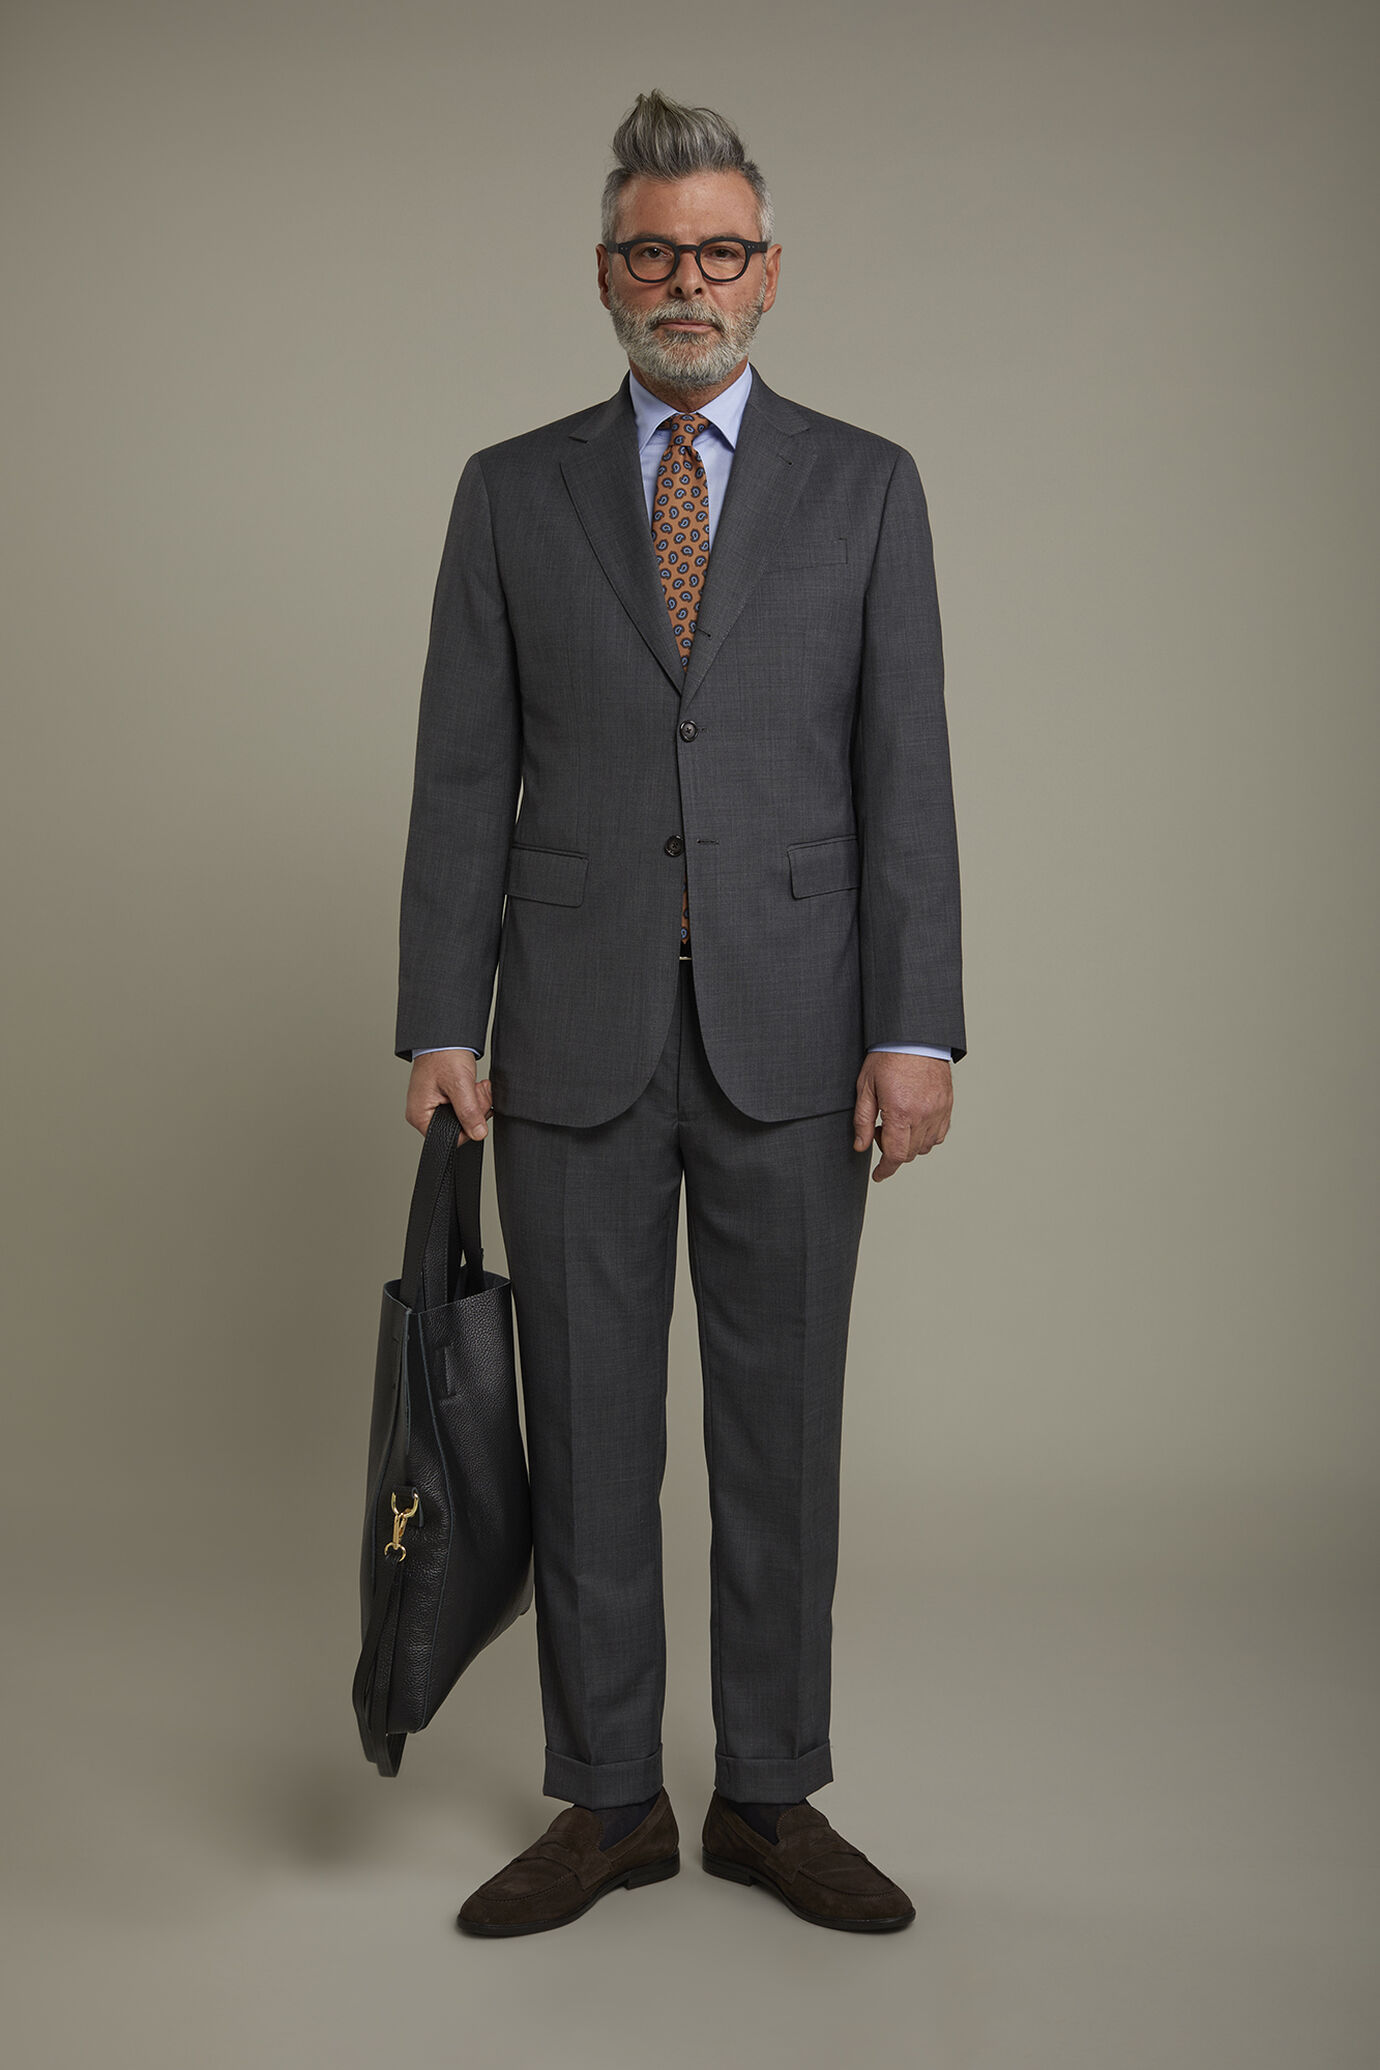 Men's single-breasted Wool Blend suit with regular fit pinstripe design